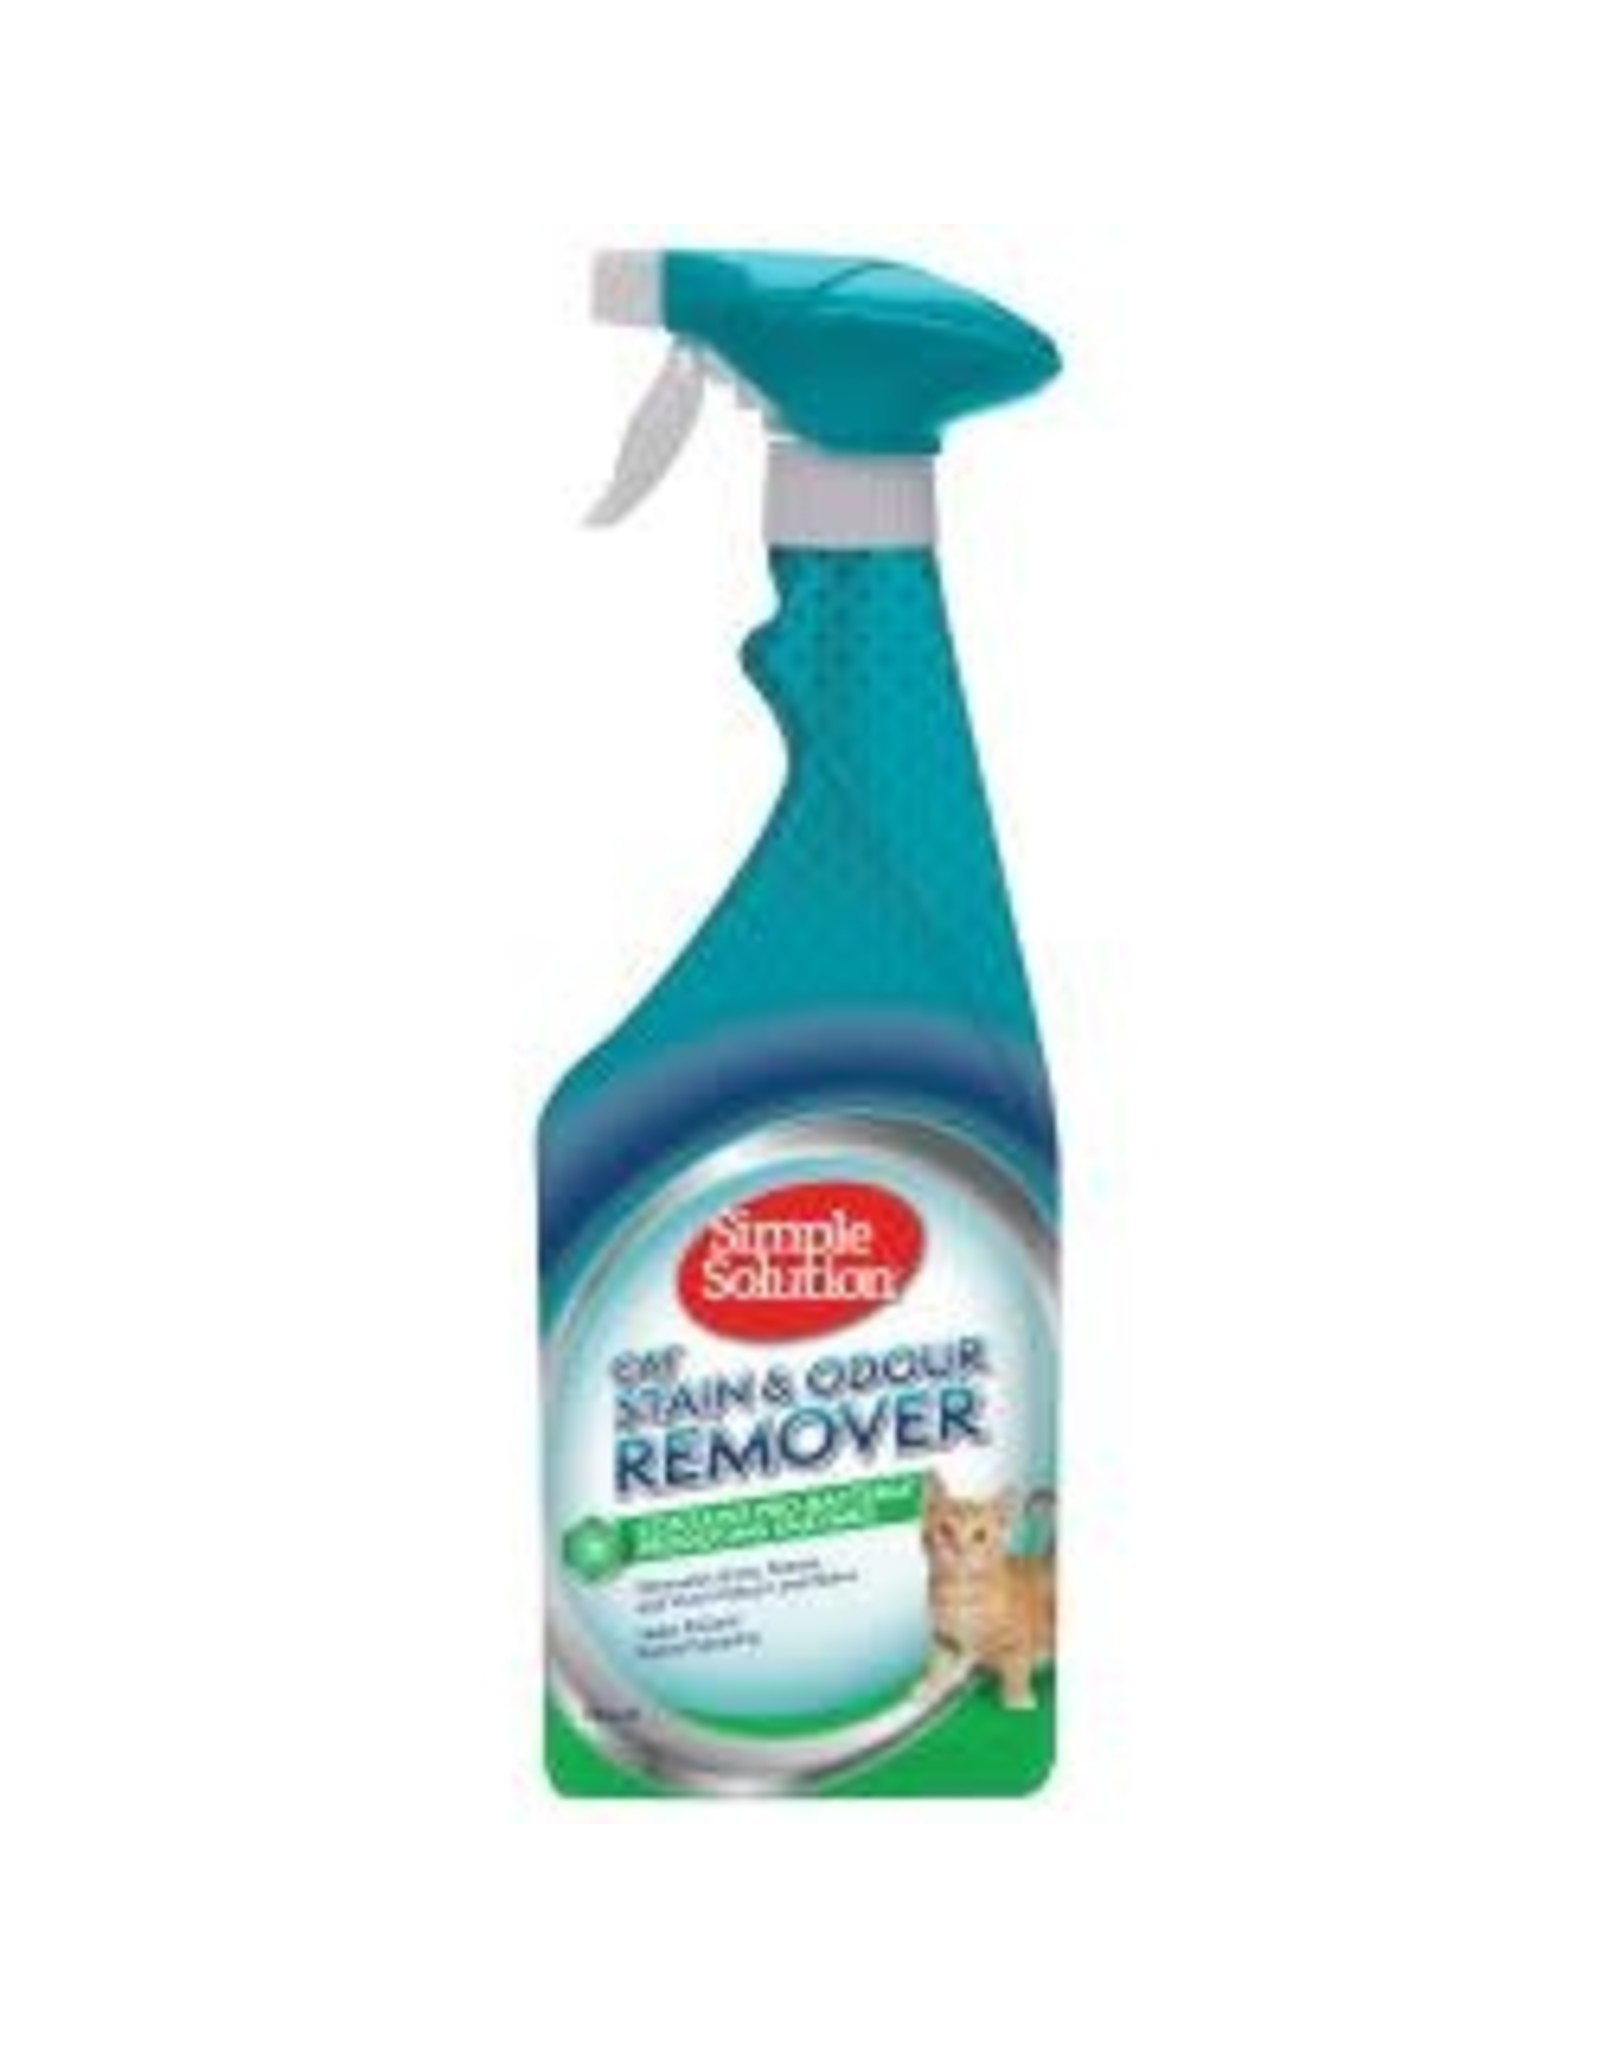 Simple Solutions SS Cat Stain & Odour Remover 750ml